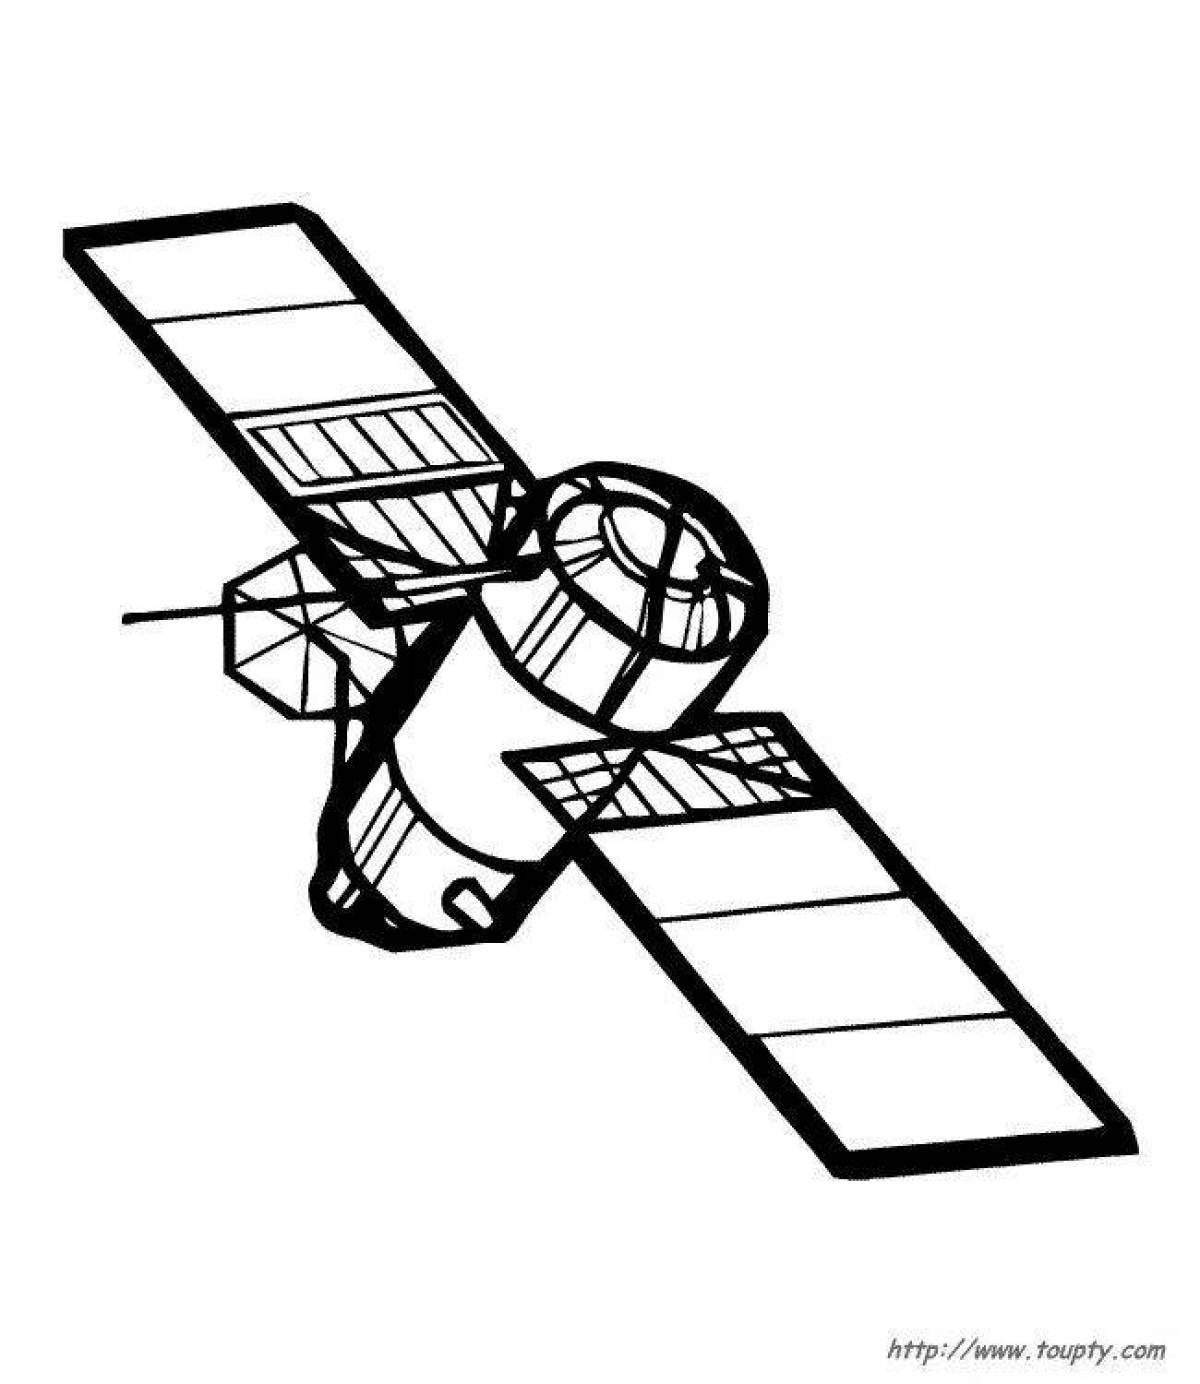 Majestic satellite coloring page